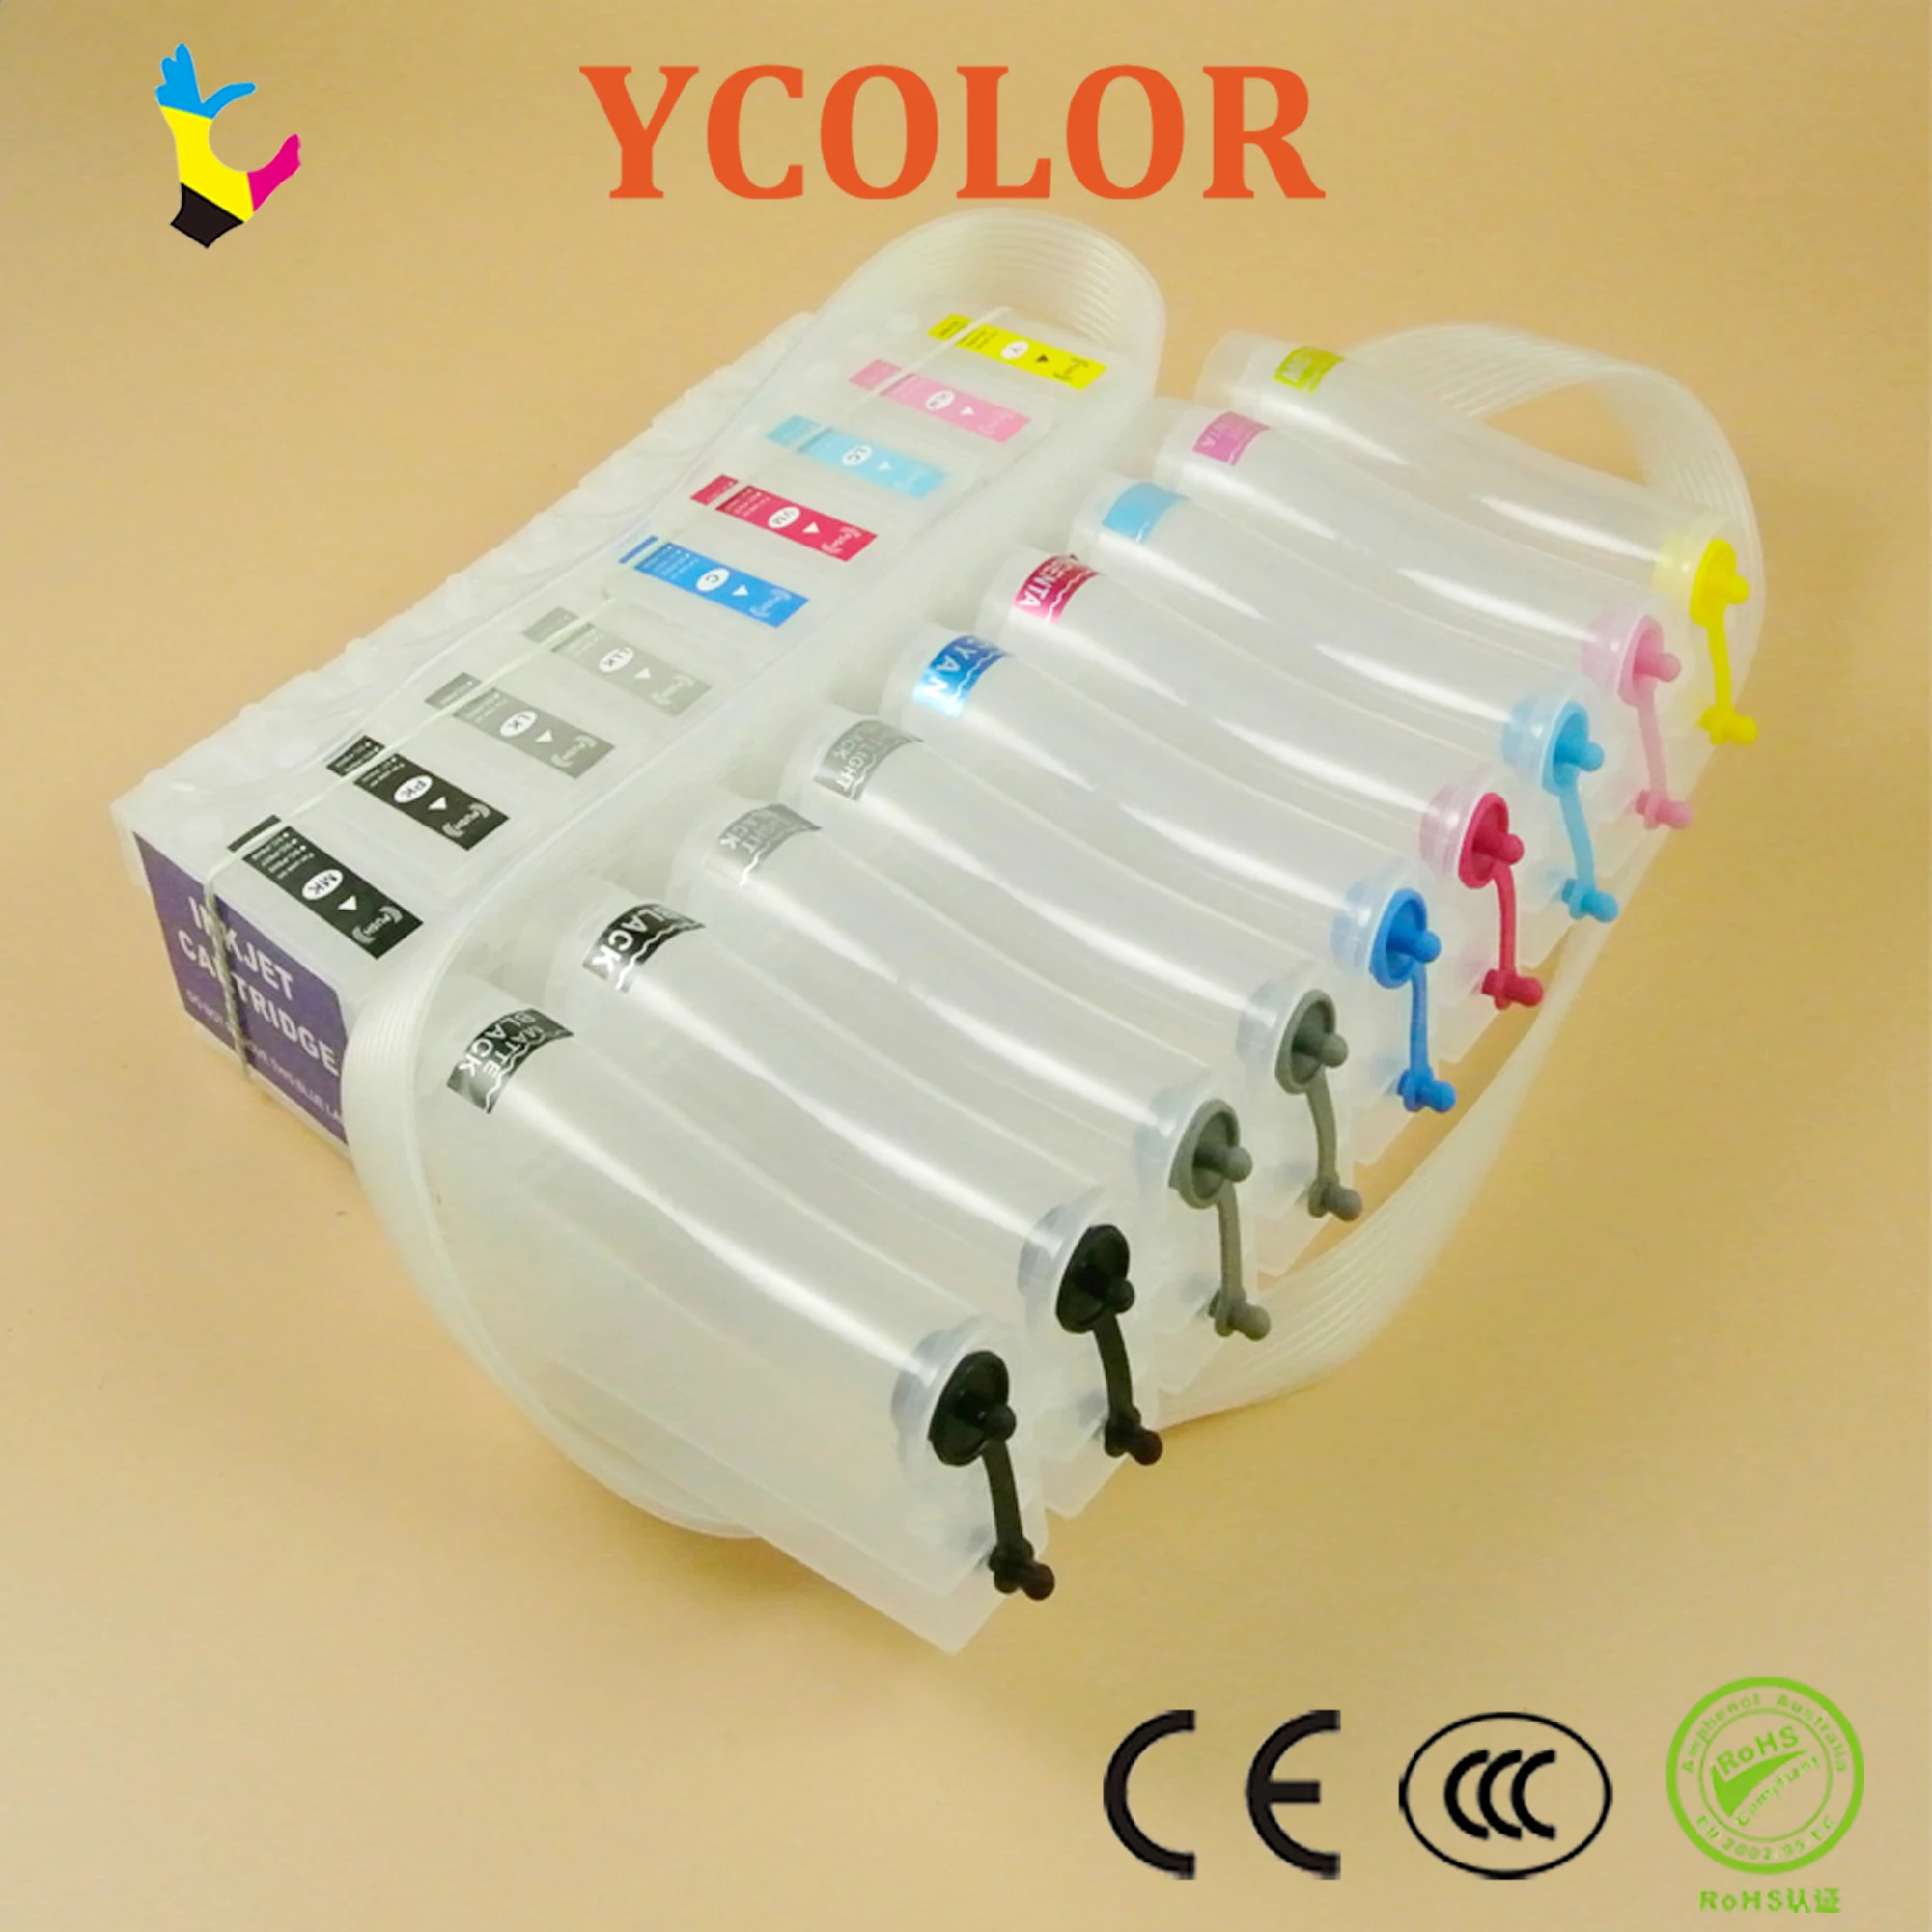 Free Shipping 9 Colorset Sc P600 Ciss System For Epson Sure Color P600 Ciss With Show Ink 7645